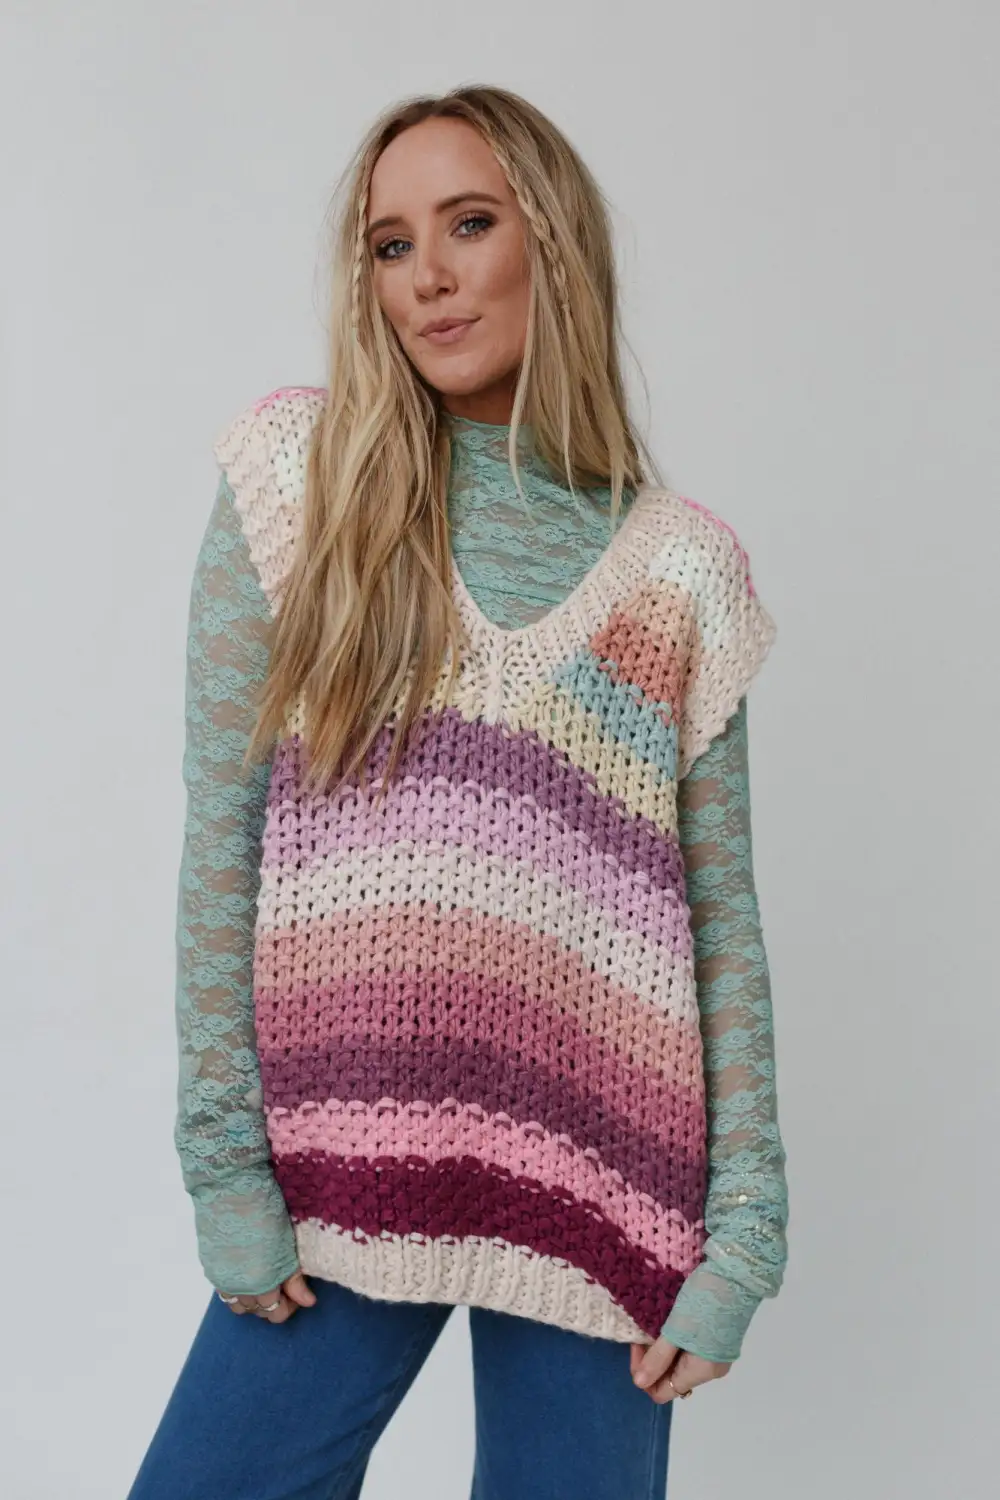 Wrapped Up In Color Knit Vest - Pink Multi